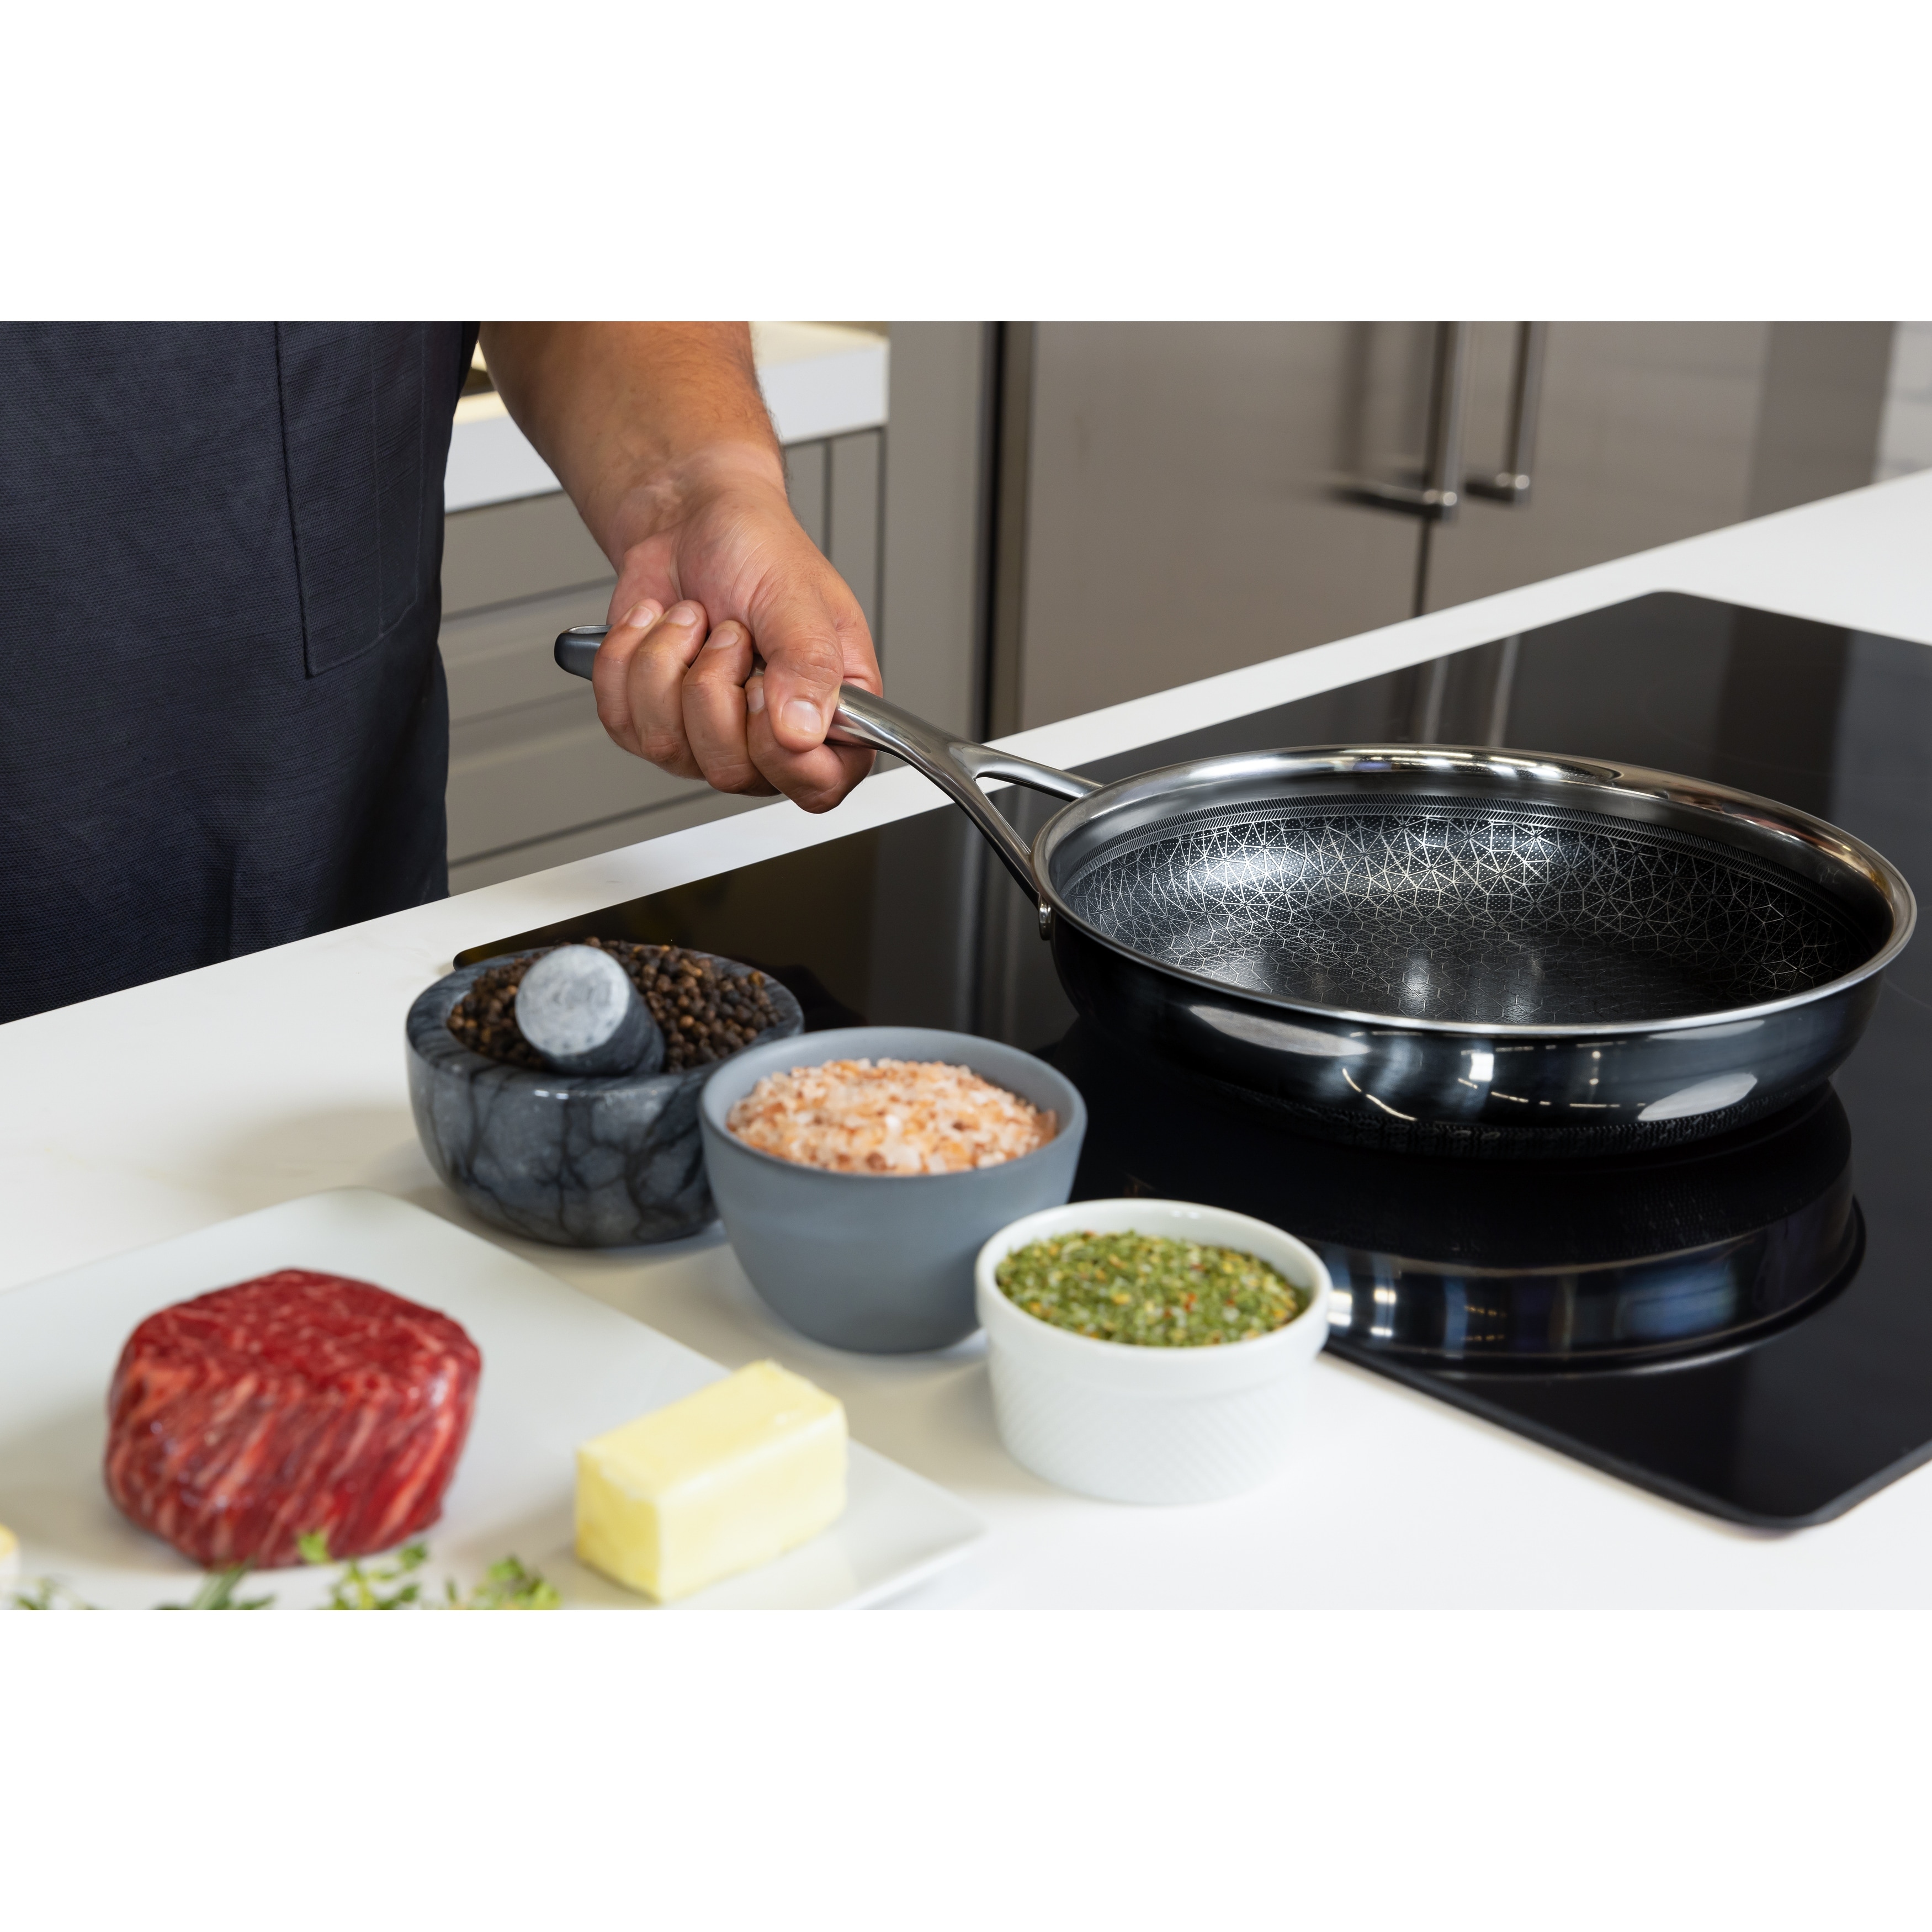 DiamondClad by Livwell Hybrid Nonstick Frying Pan Set with Tempered Glass  Lid, Dishwasher Safe, Cool Touch Handle, PFOA-free - On Sale - Bed Bath &  Beyond - 37916831